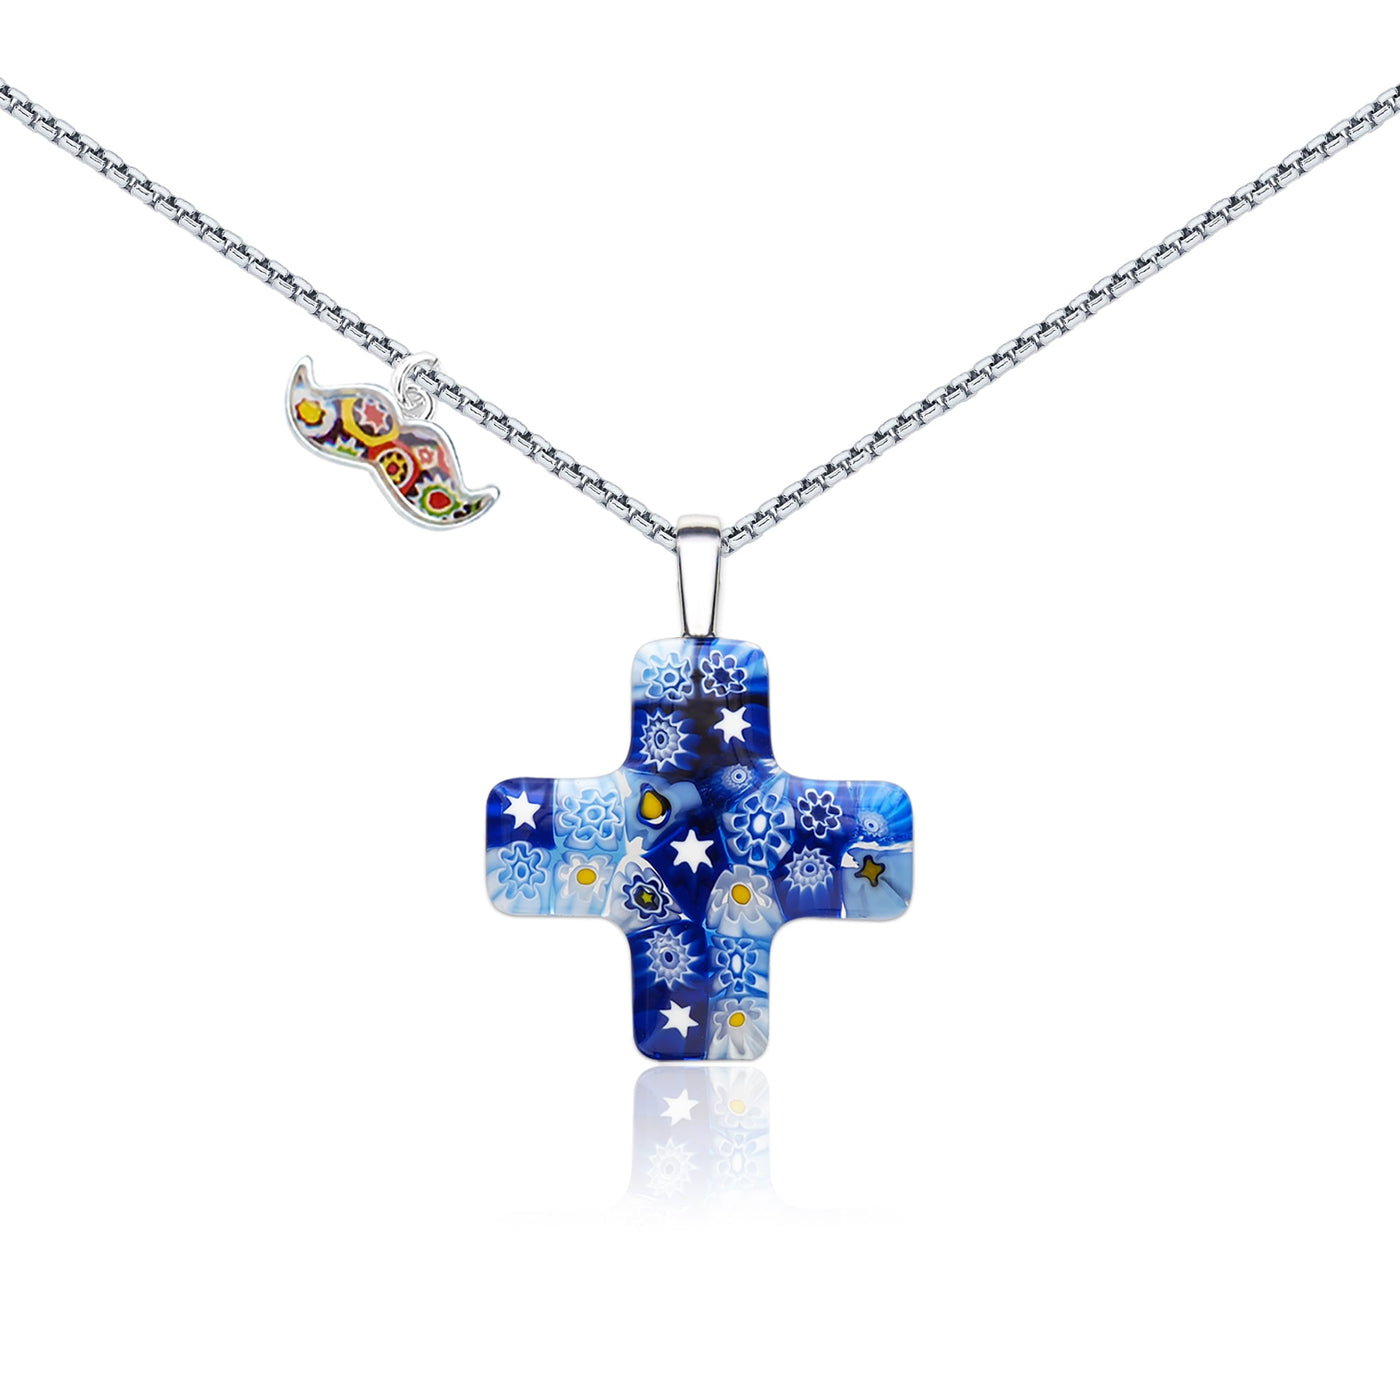 Starry Night x Greek Cross Necklace - Leather - Pendant Necklace